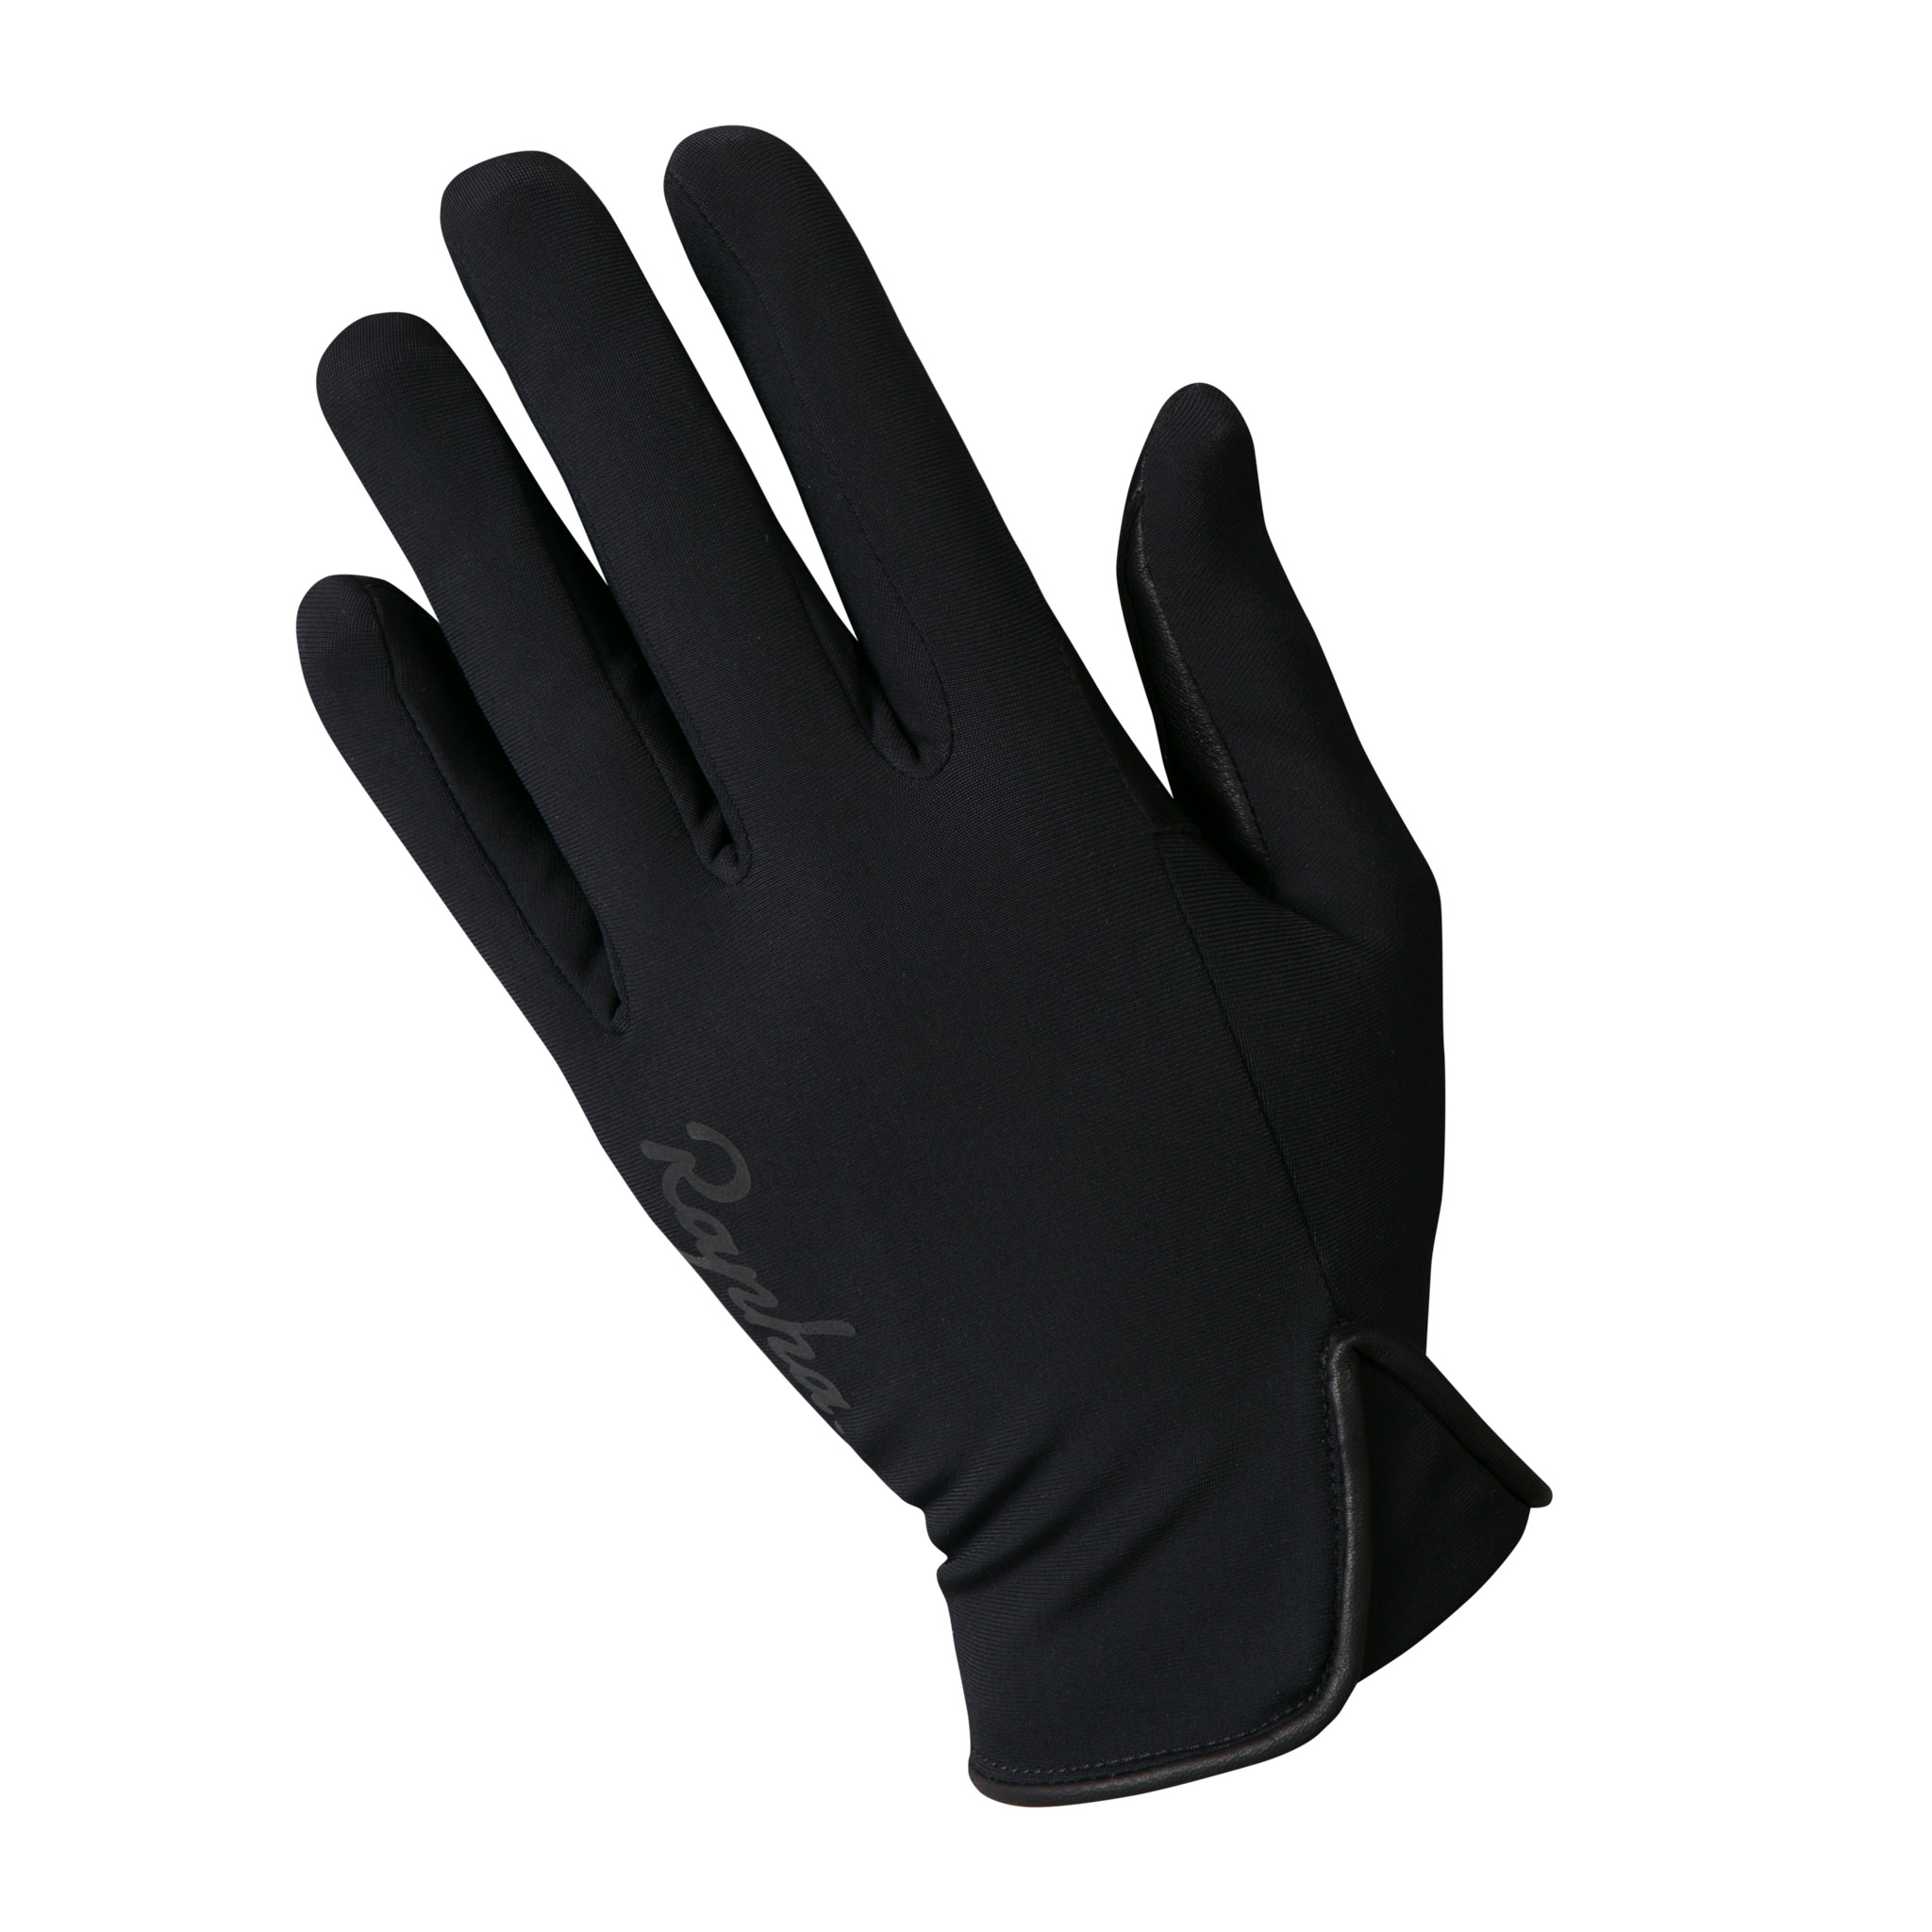 Classic Gloves | Classic Cycling Gloves for Winter Riding | Rapha